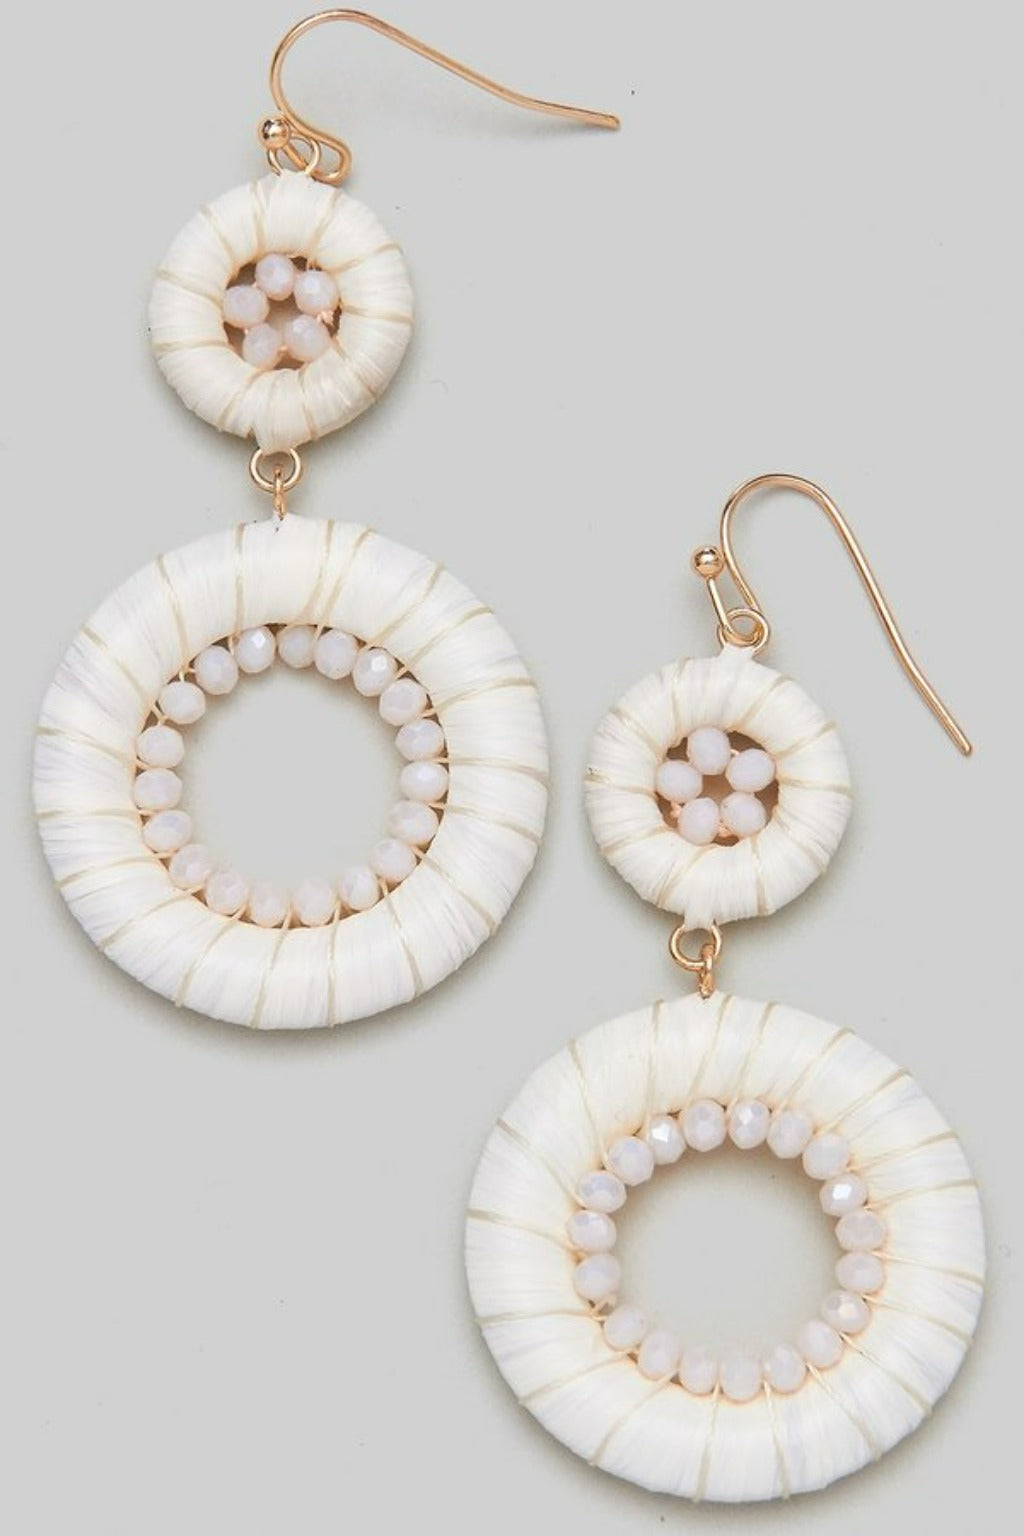 Woven and Beaded Drop Earrings Ivory